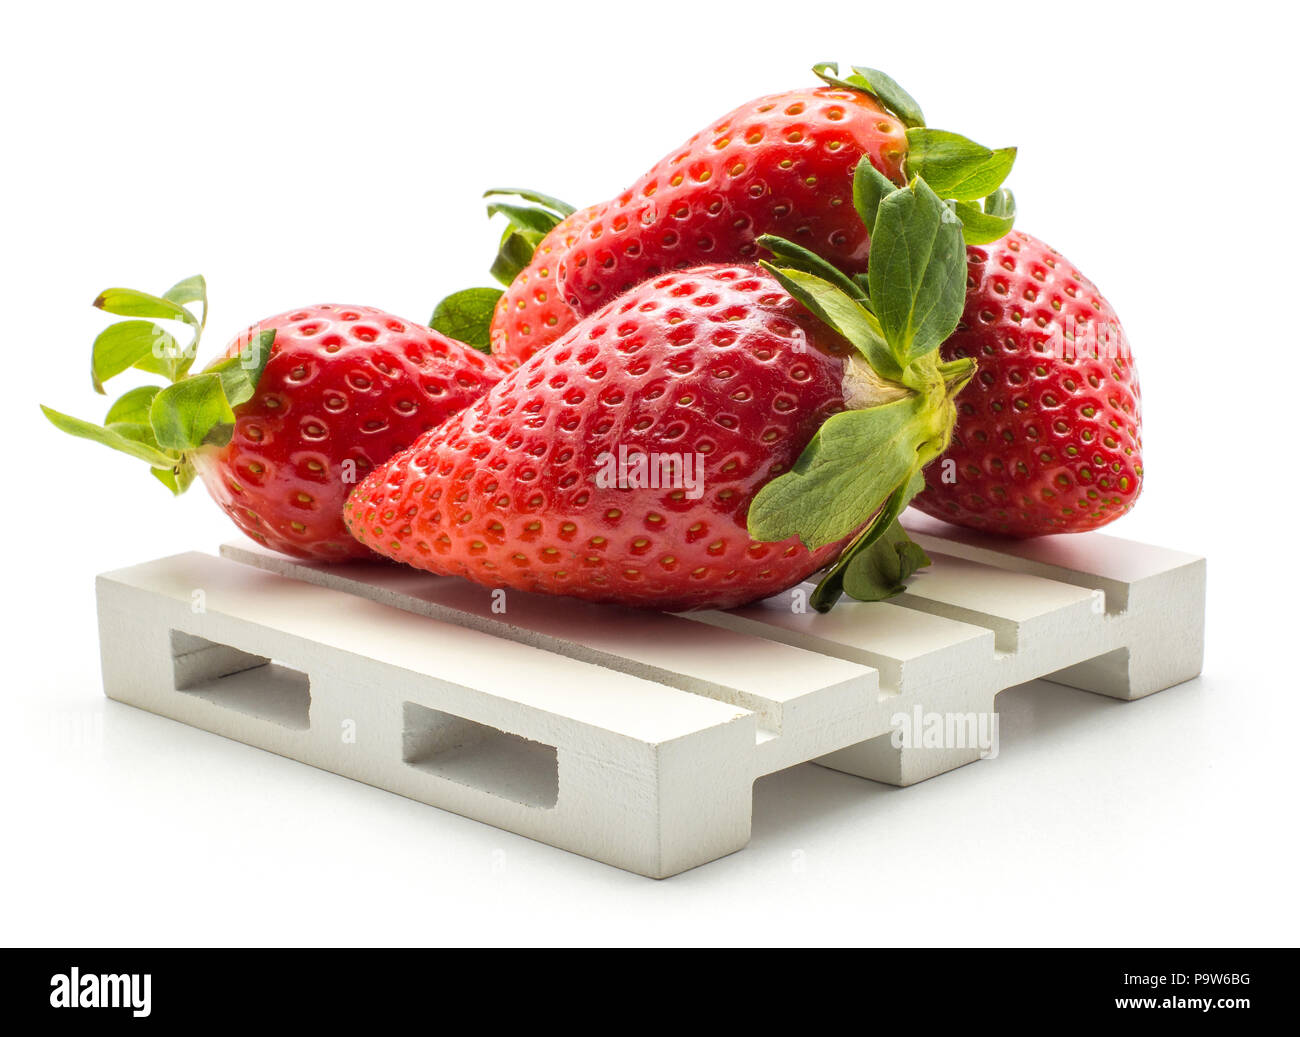 Fresh garden strawberries on a pallet isolated on white background Stock Photo